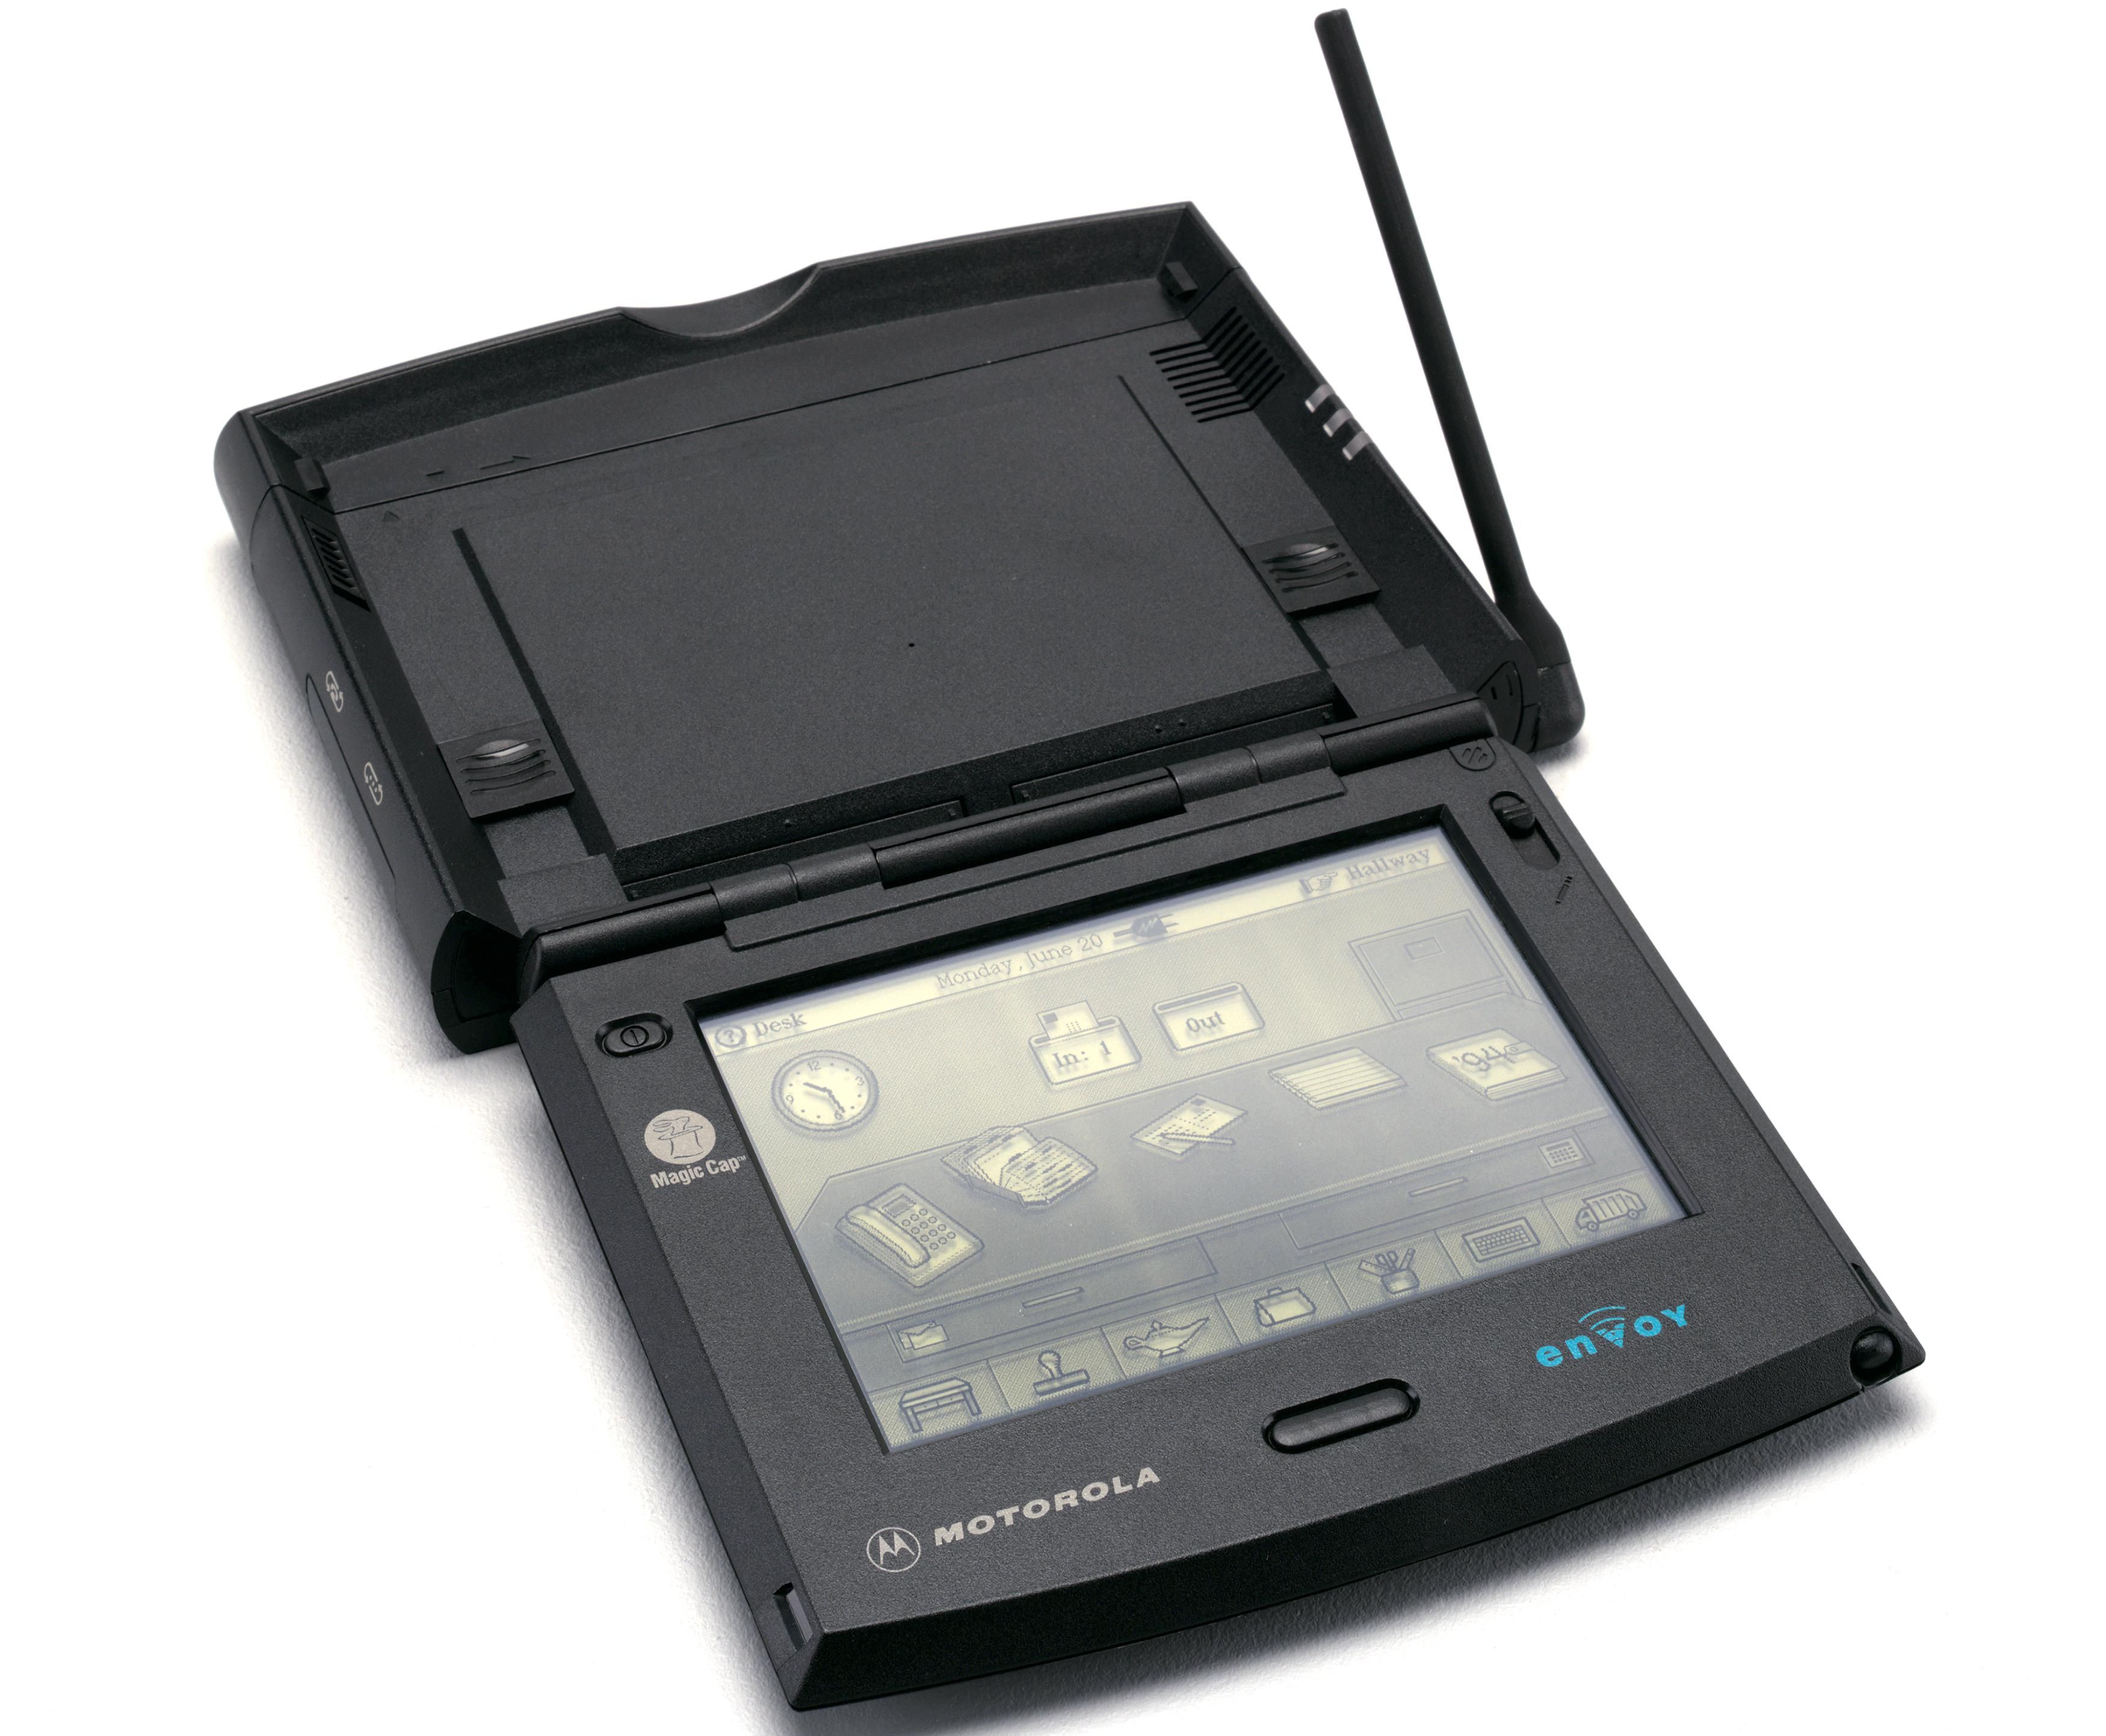 An electronic communication device with a black and white screen and antenna. The words Motorola and Envoy are printed on the device.